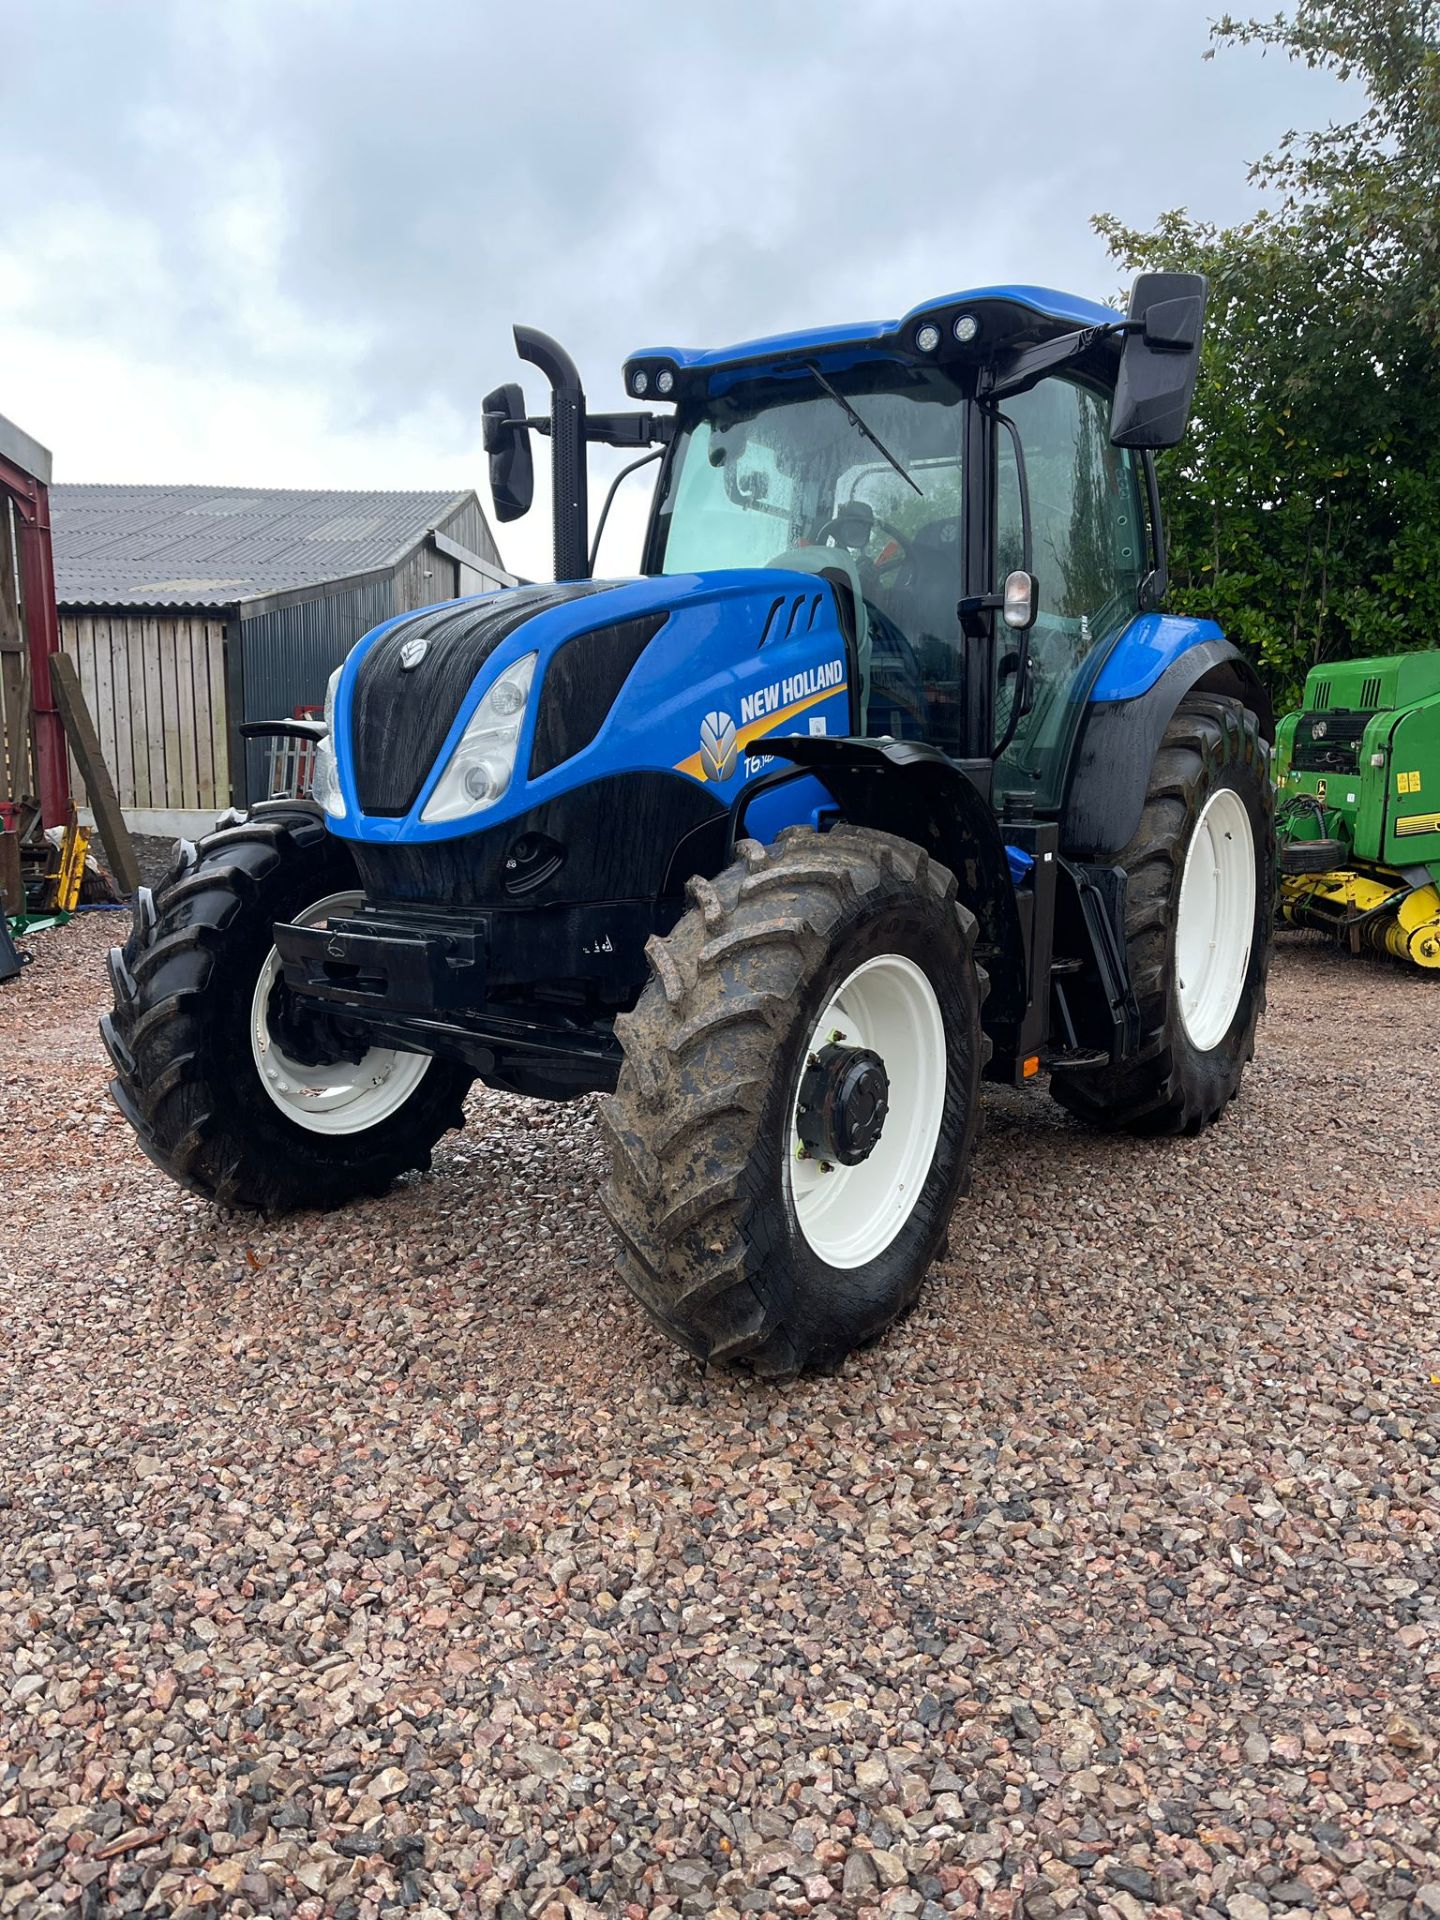 NEW HOLLAND T6.145 TRACTOR - Image 2 of 11